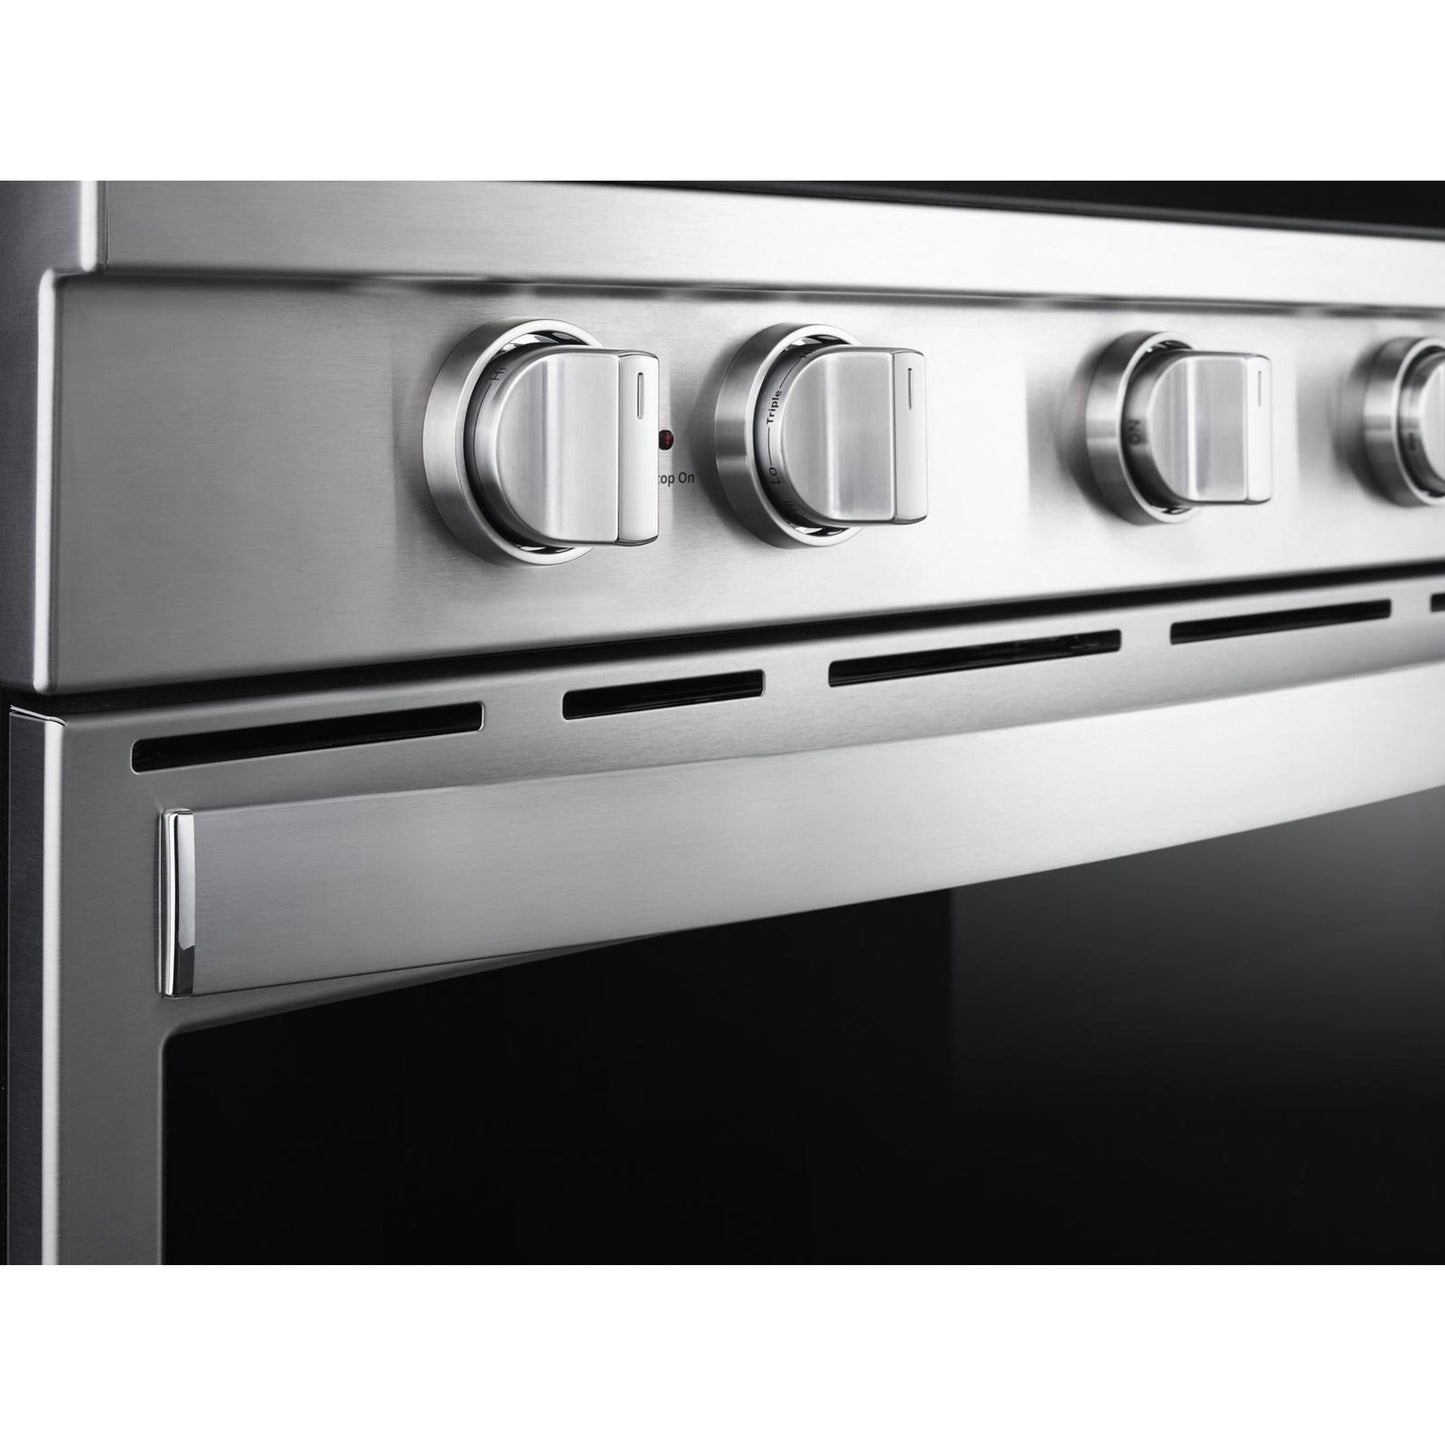 Whirlpool Front Control Range (YWEE750H0HZ) - Stainless Steel